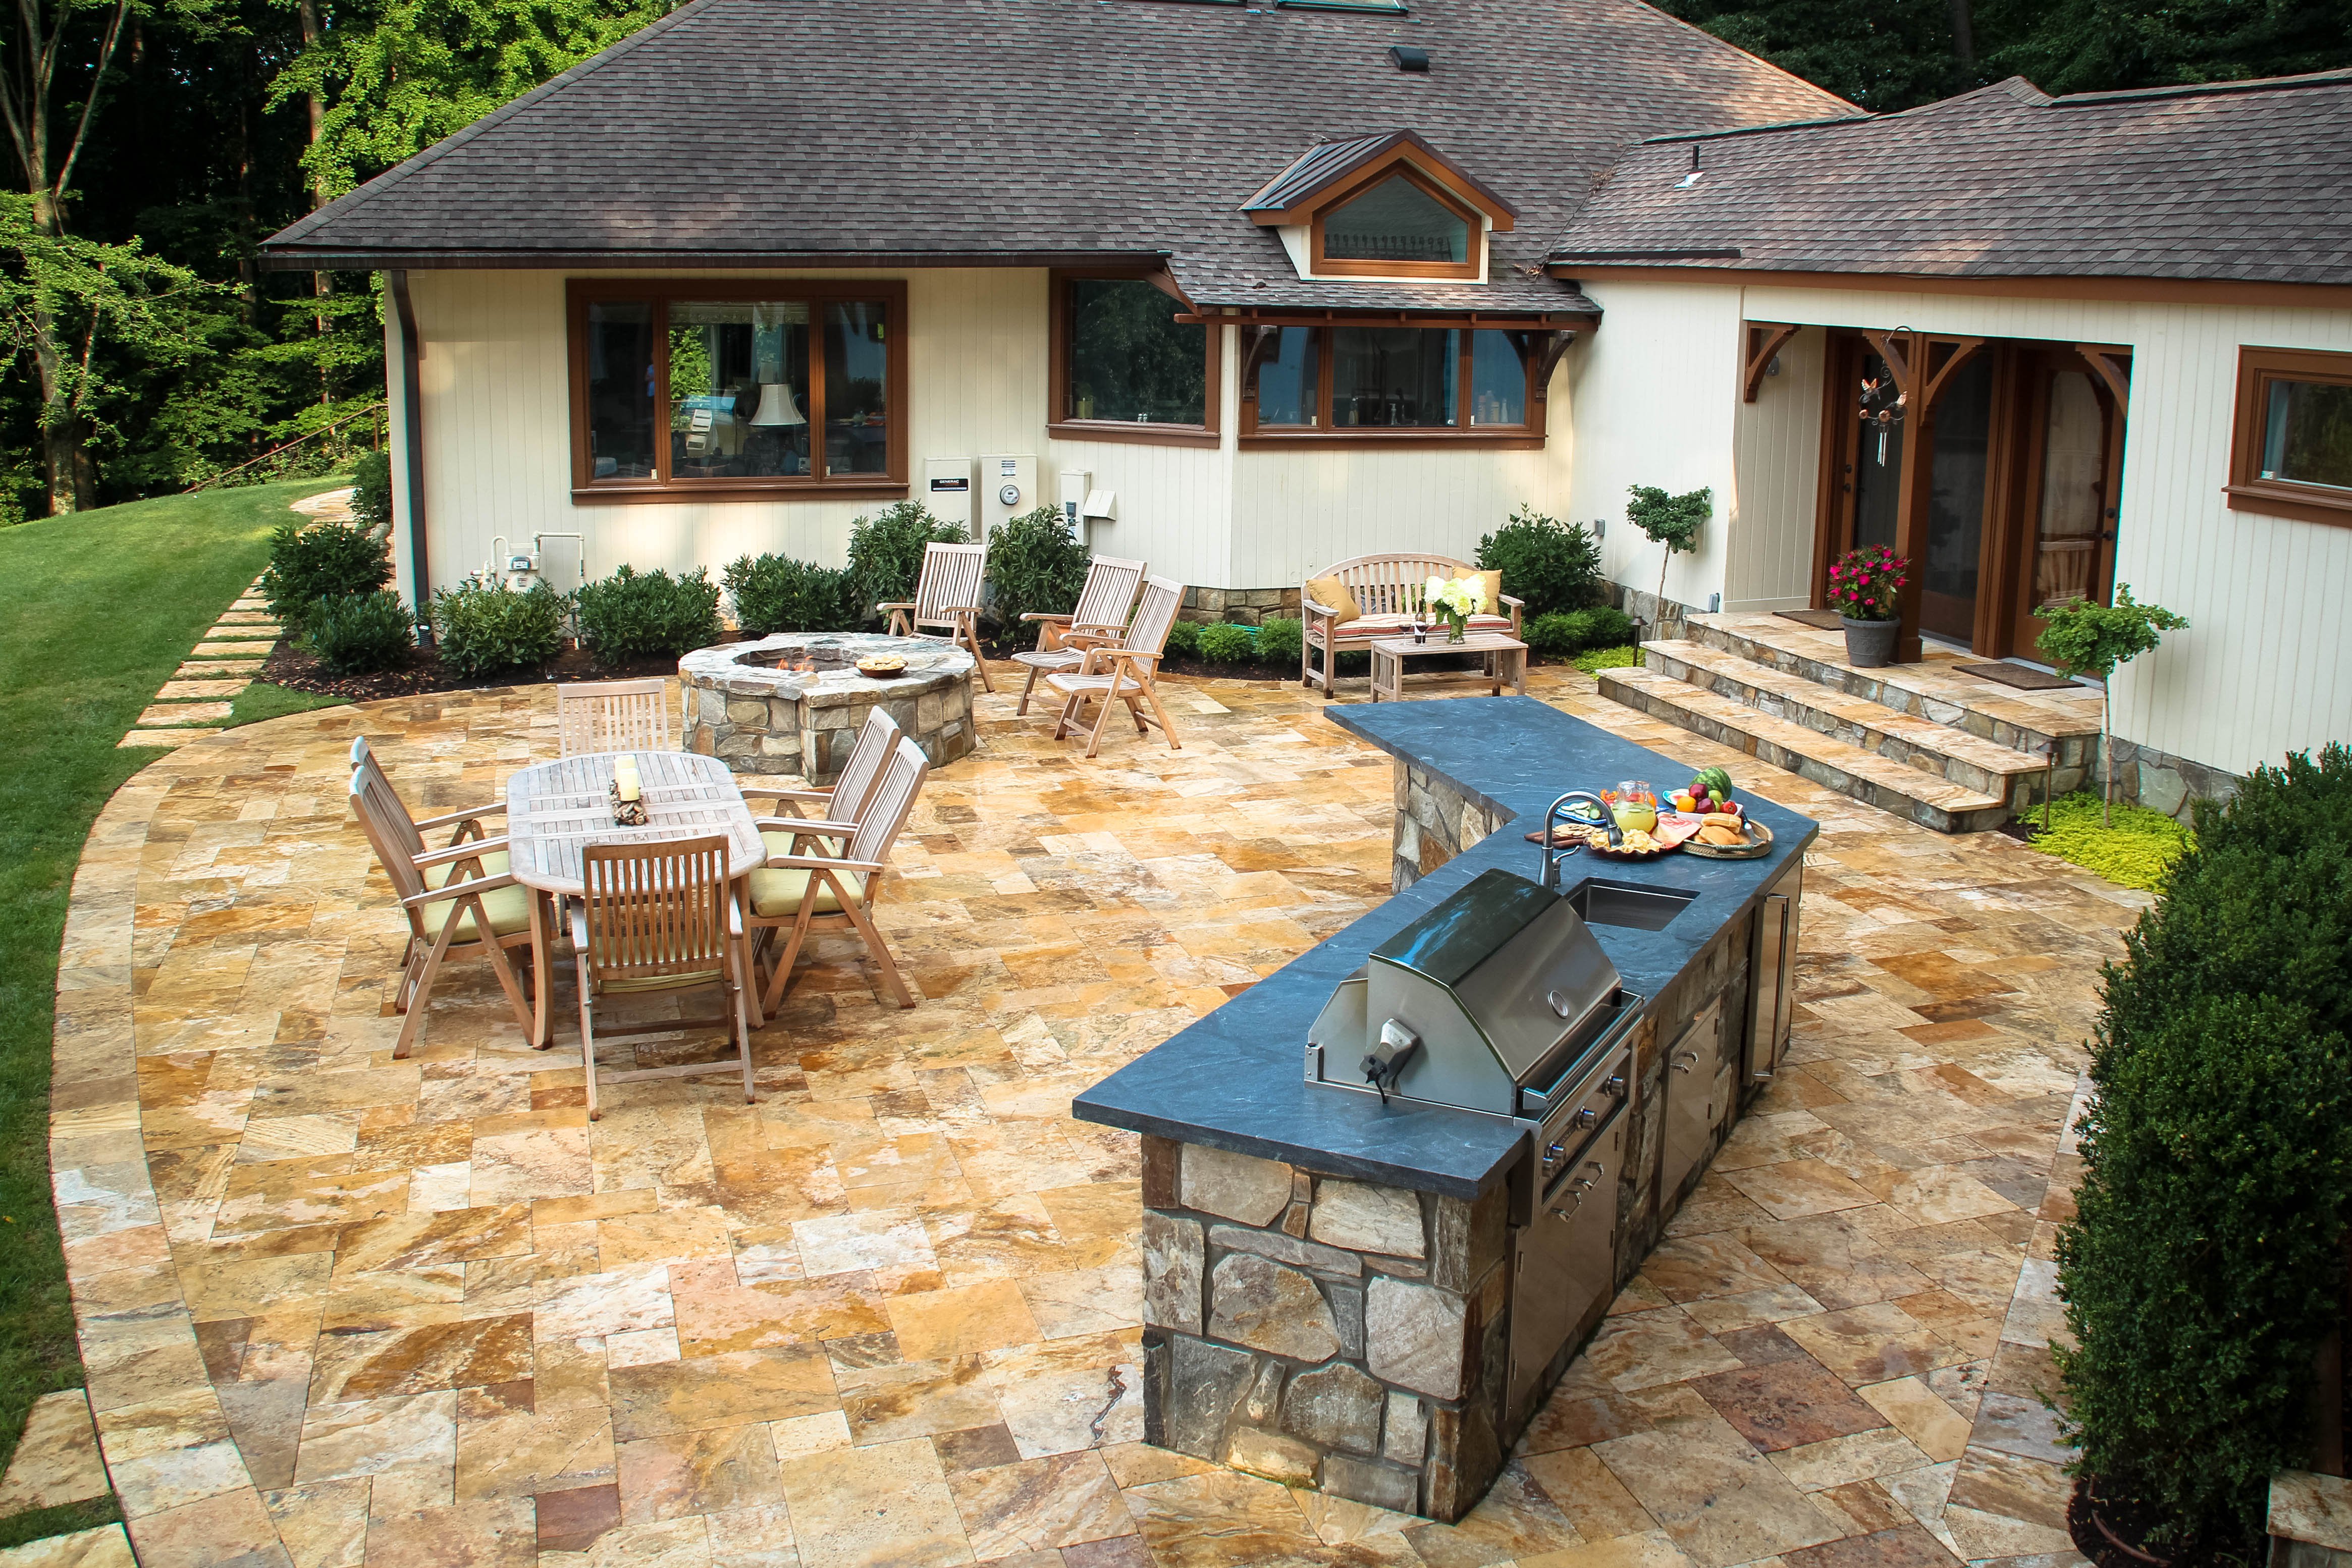 https://rossen.s3.amazonaws.com/images/Bennett_-_Grill_and_Bar_Firepit_Patio_with_step.original.jpg